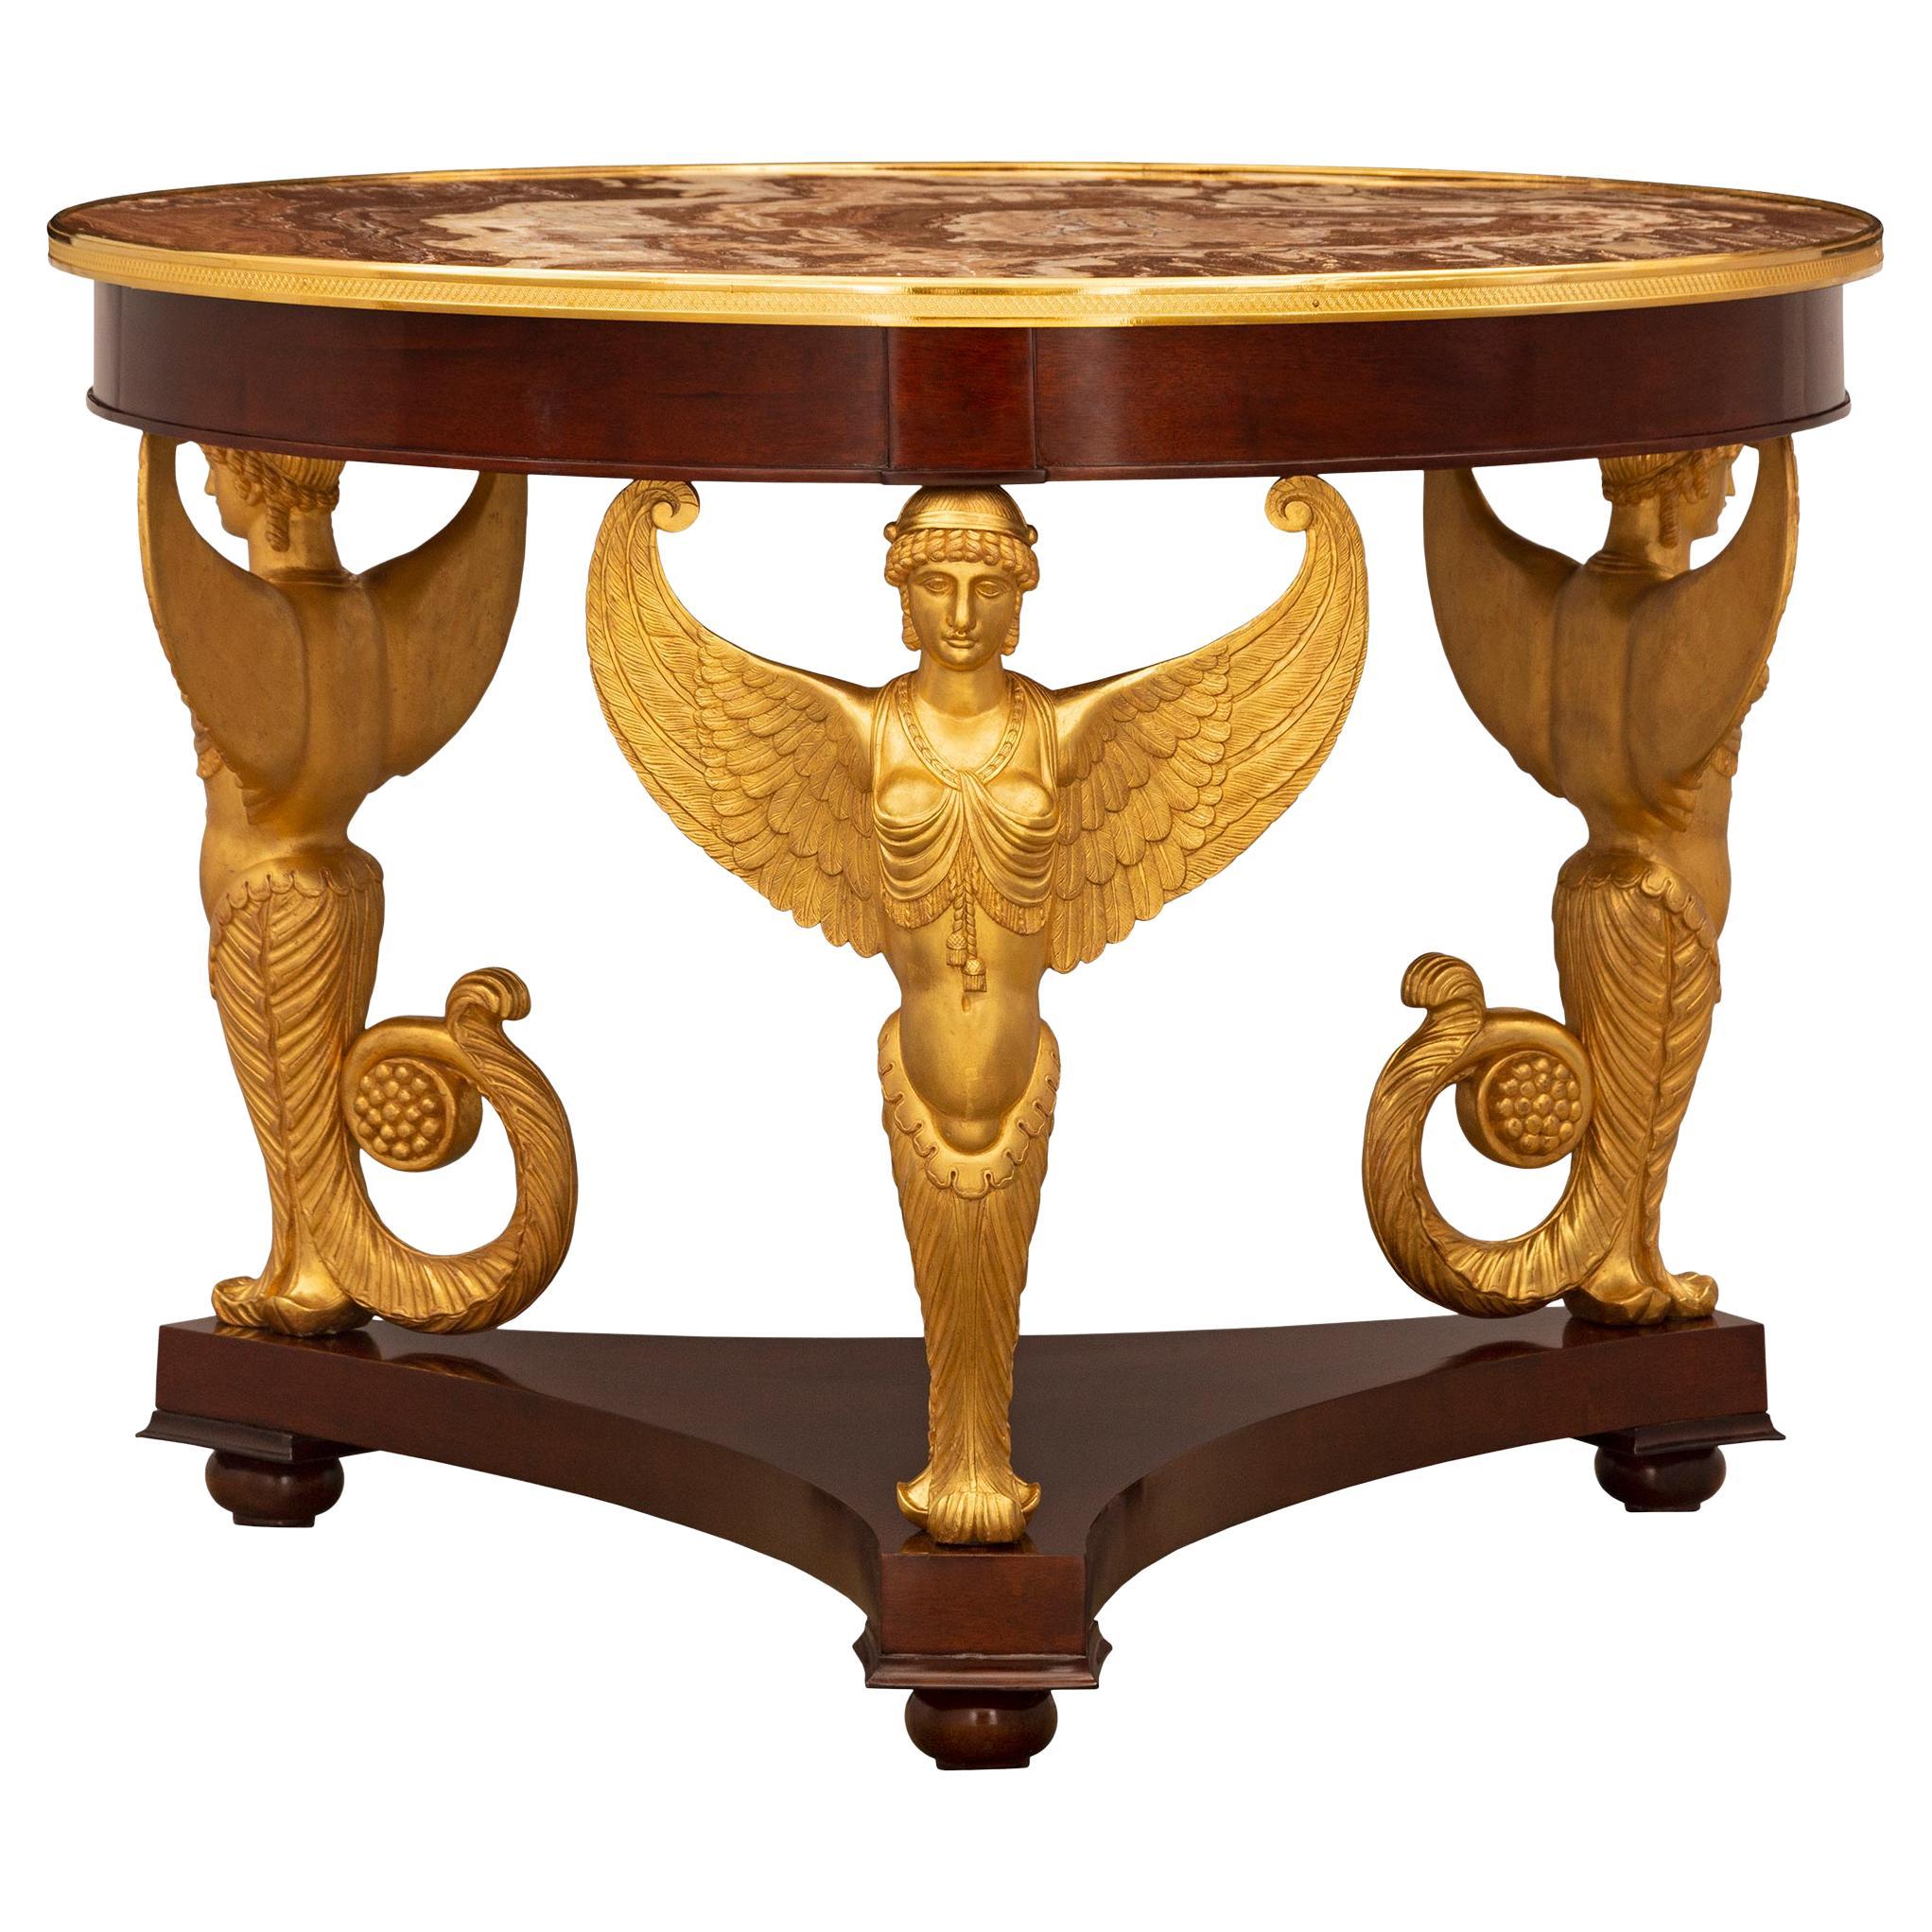 French 19th Century Empire St. Mahogany, Giltwood, Ormolu And Marble Table For Sale